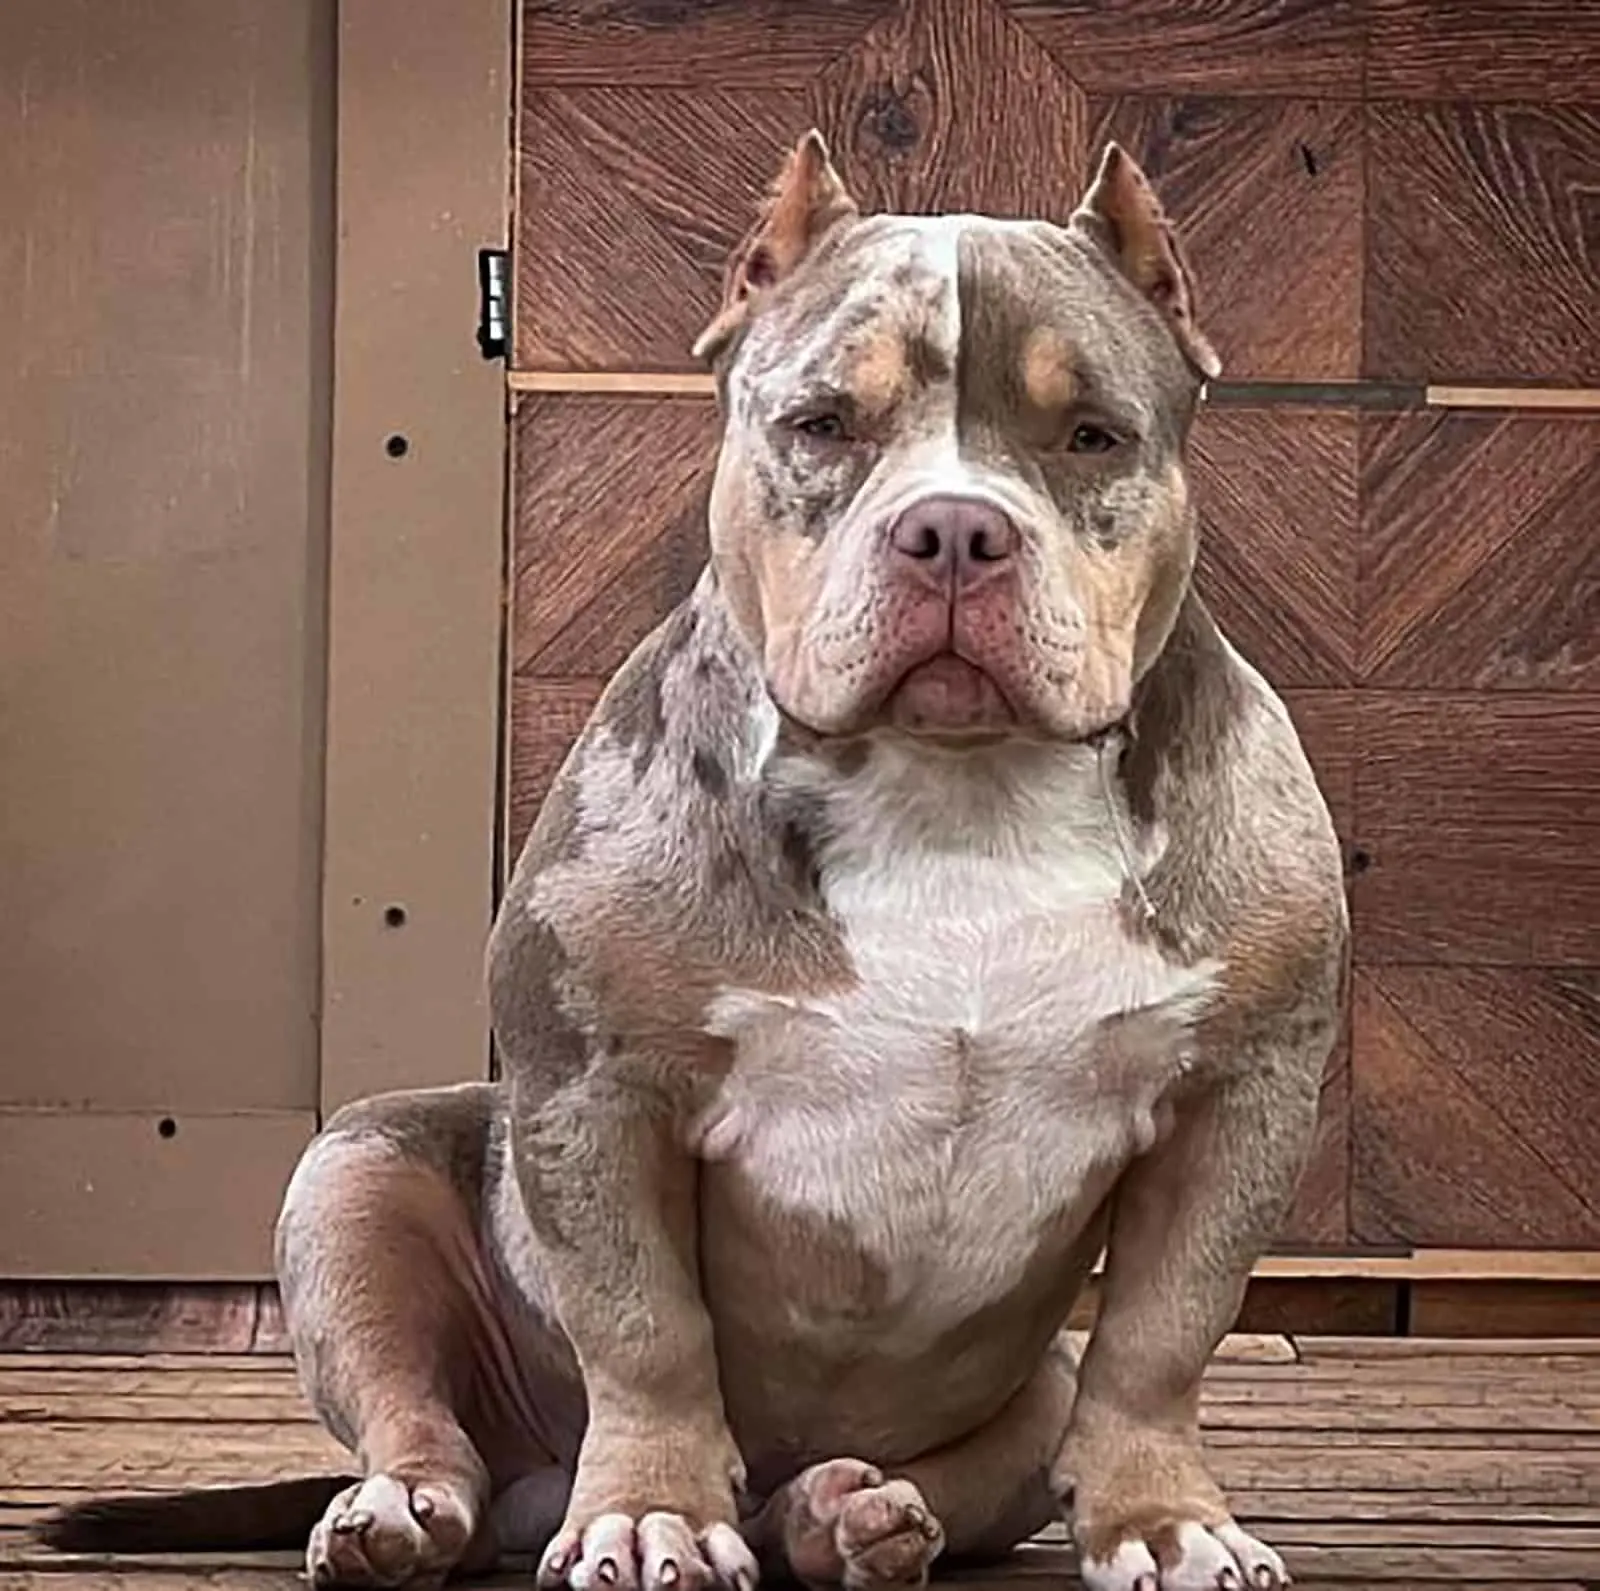 merle american bully dog sitting outdoors